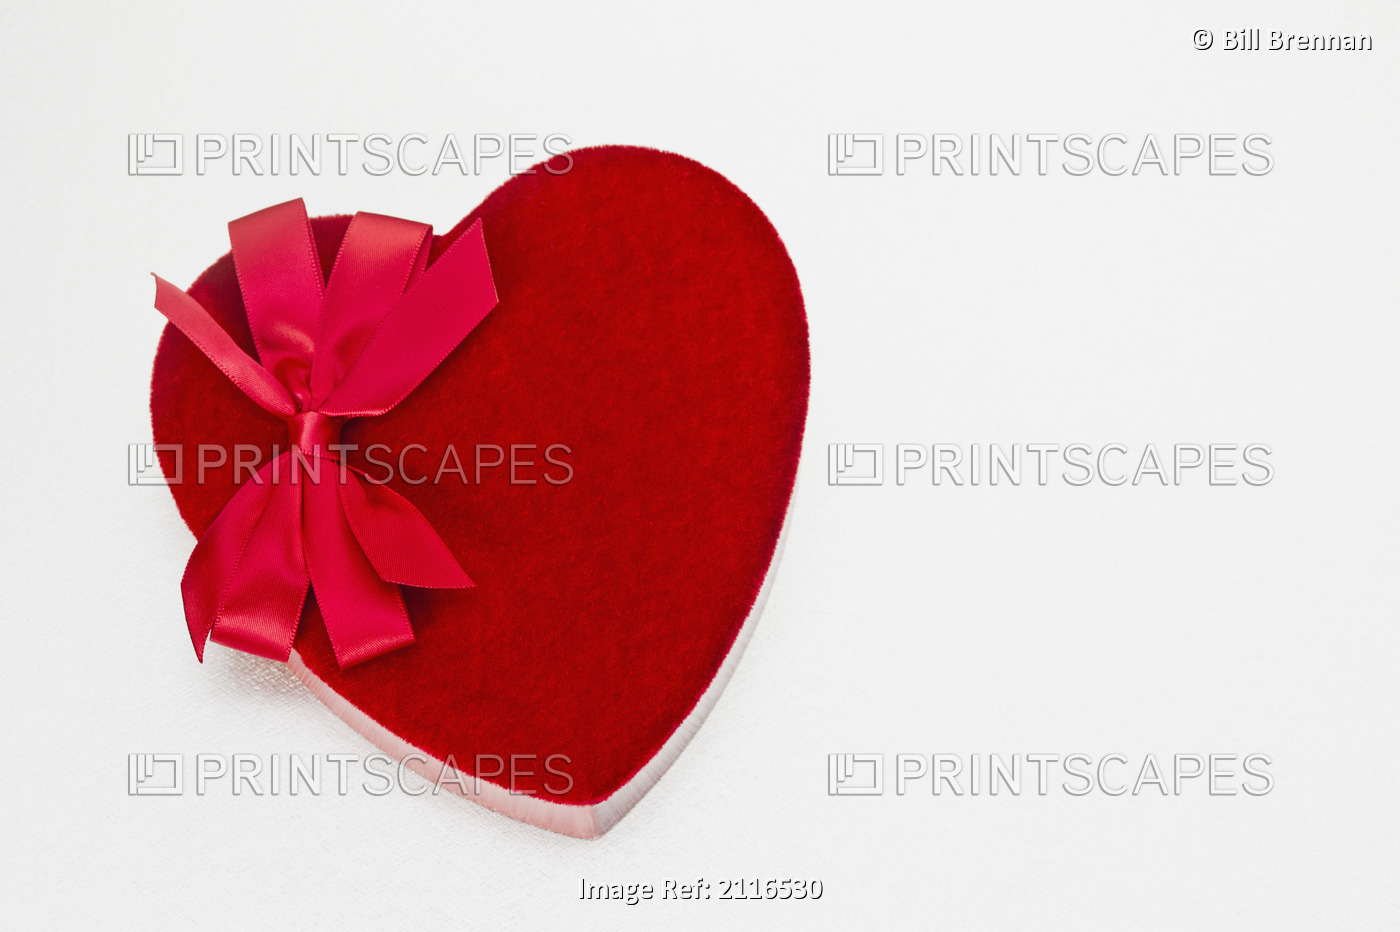 Valentines heart-shaped candy box against white background.